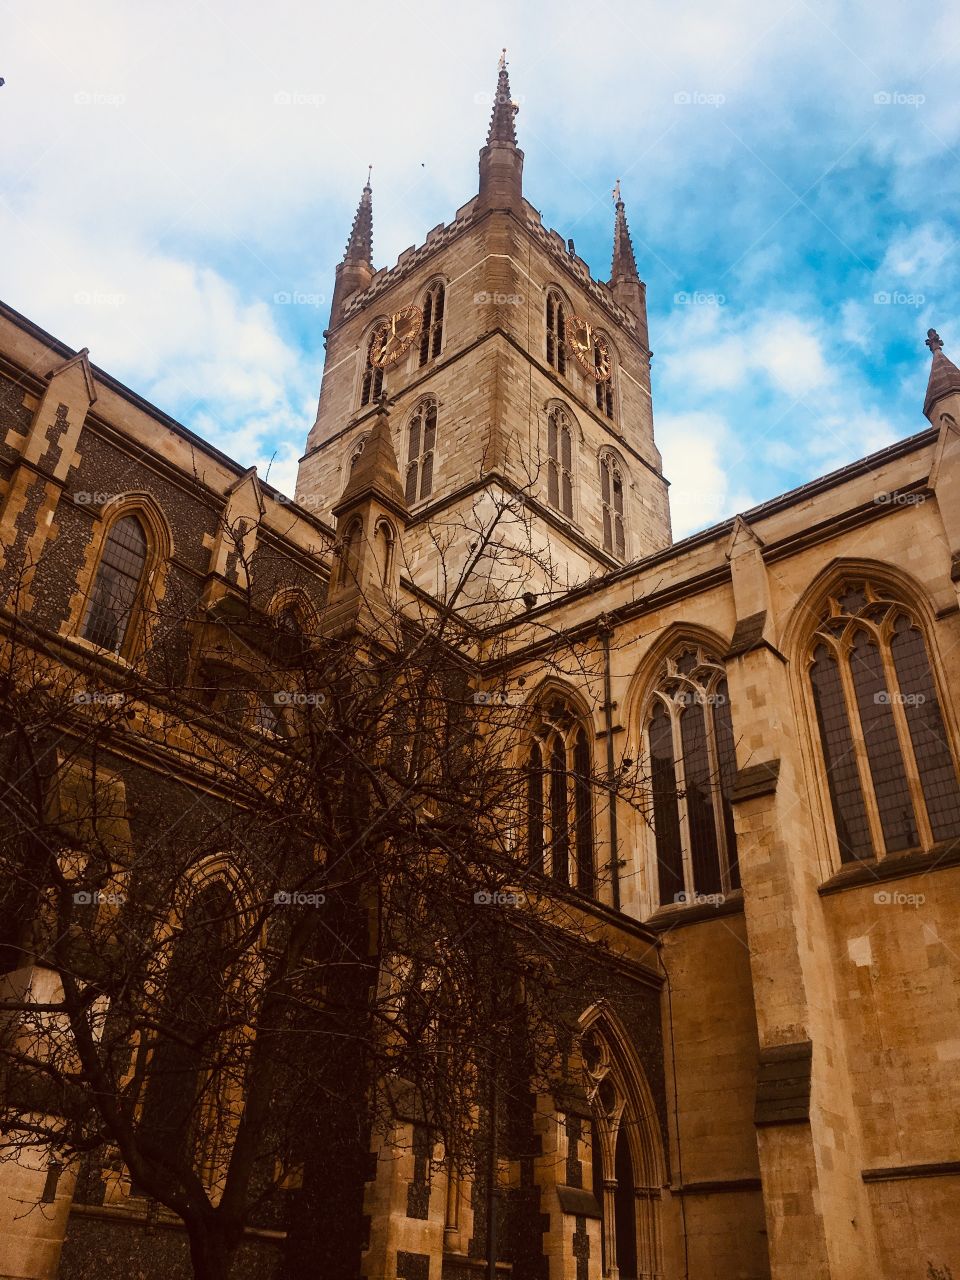 A cathedral in the UK